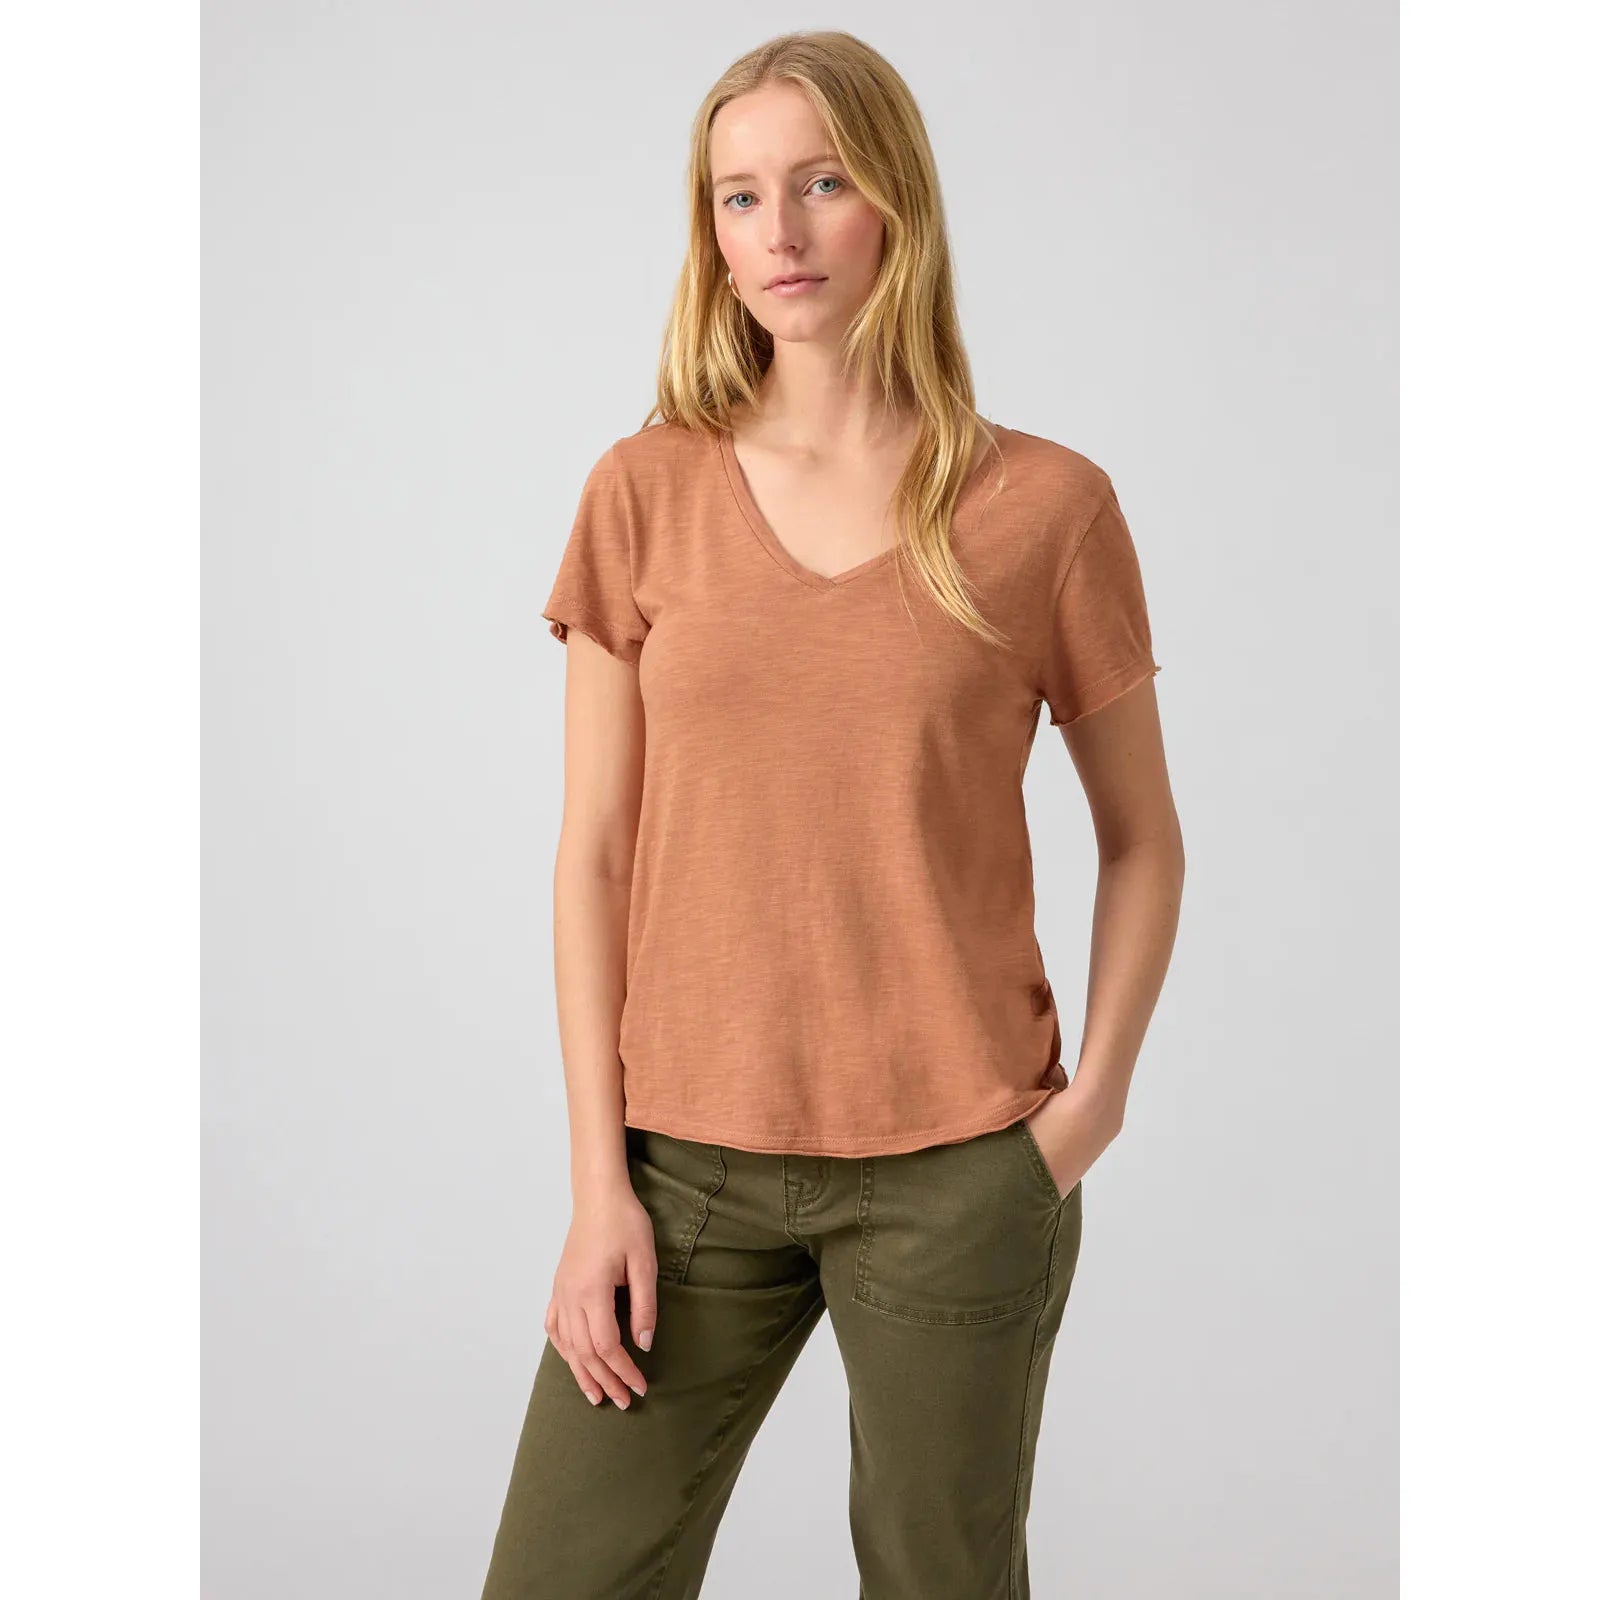 Sanctuary - Carefree Tee in Mocha Mousse